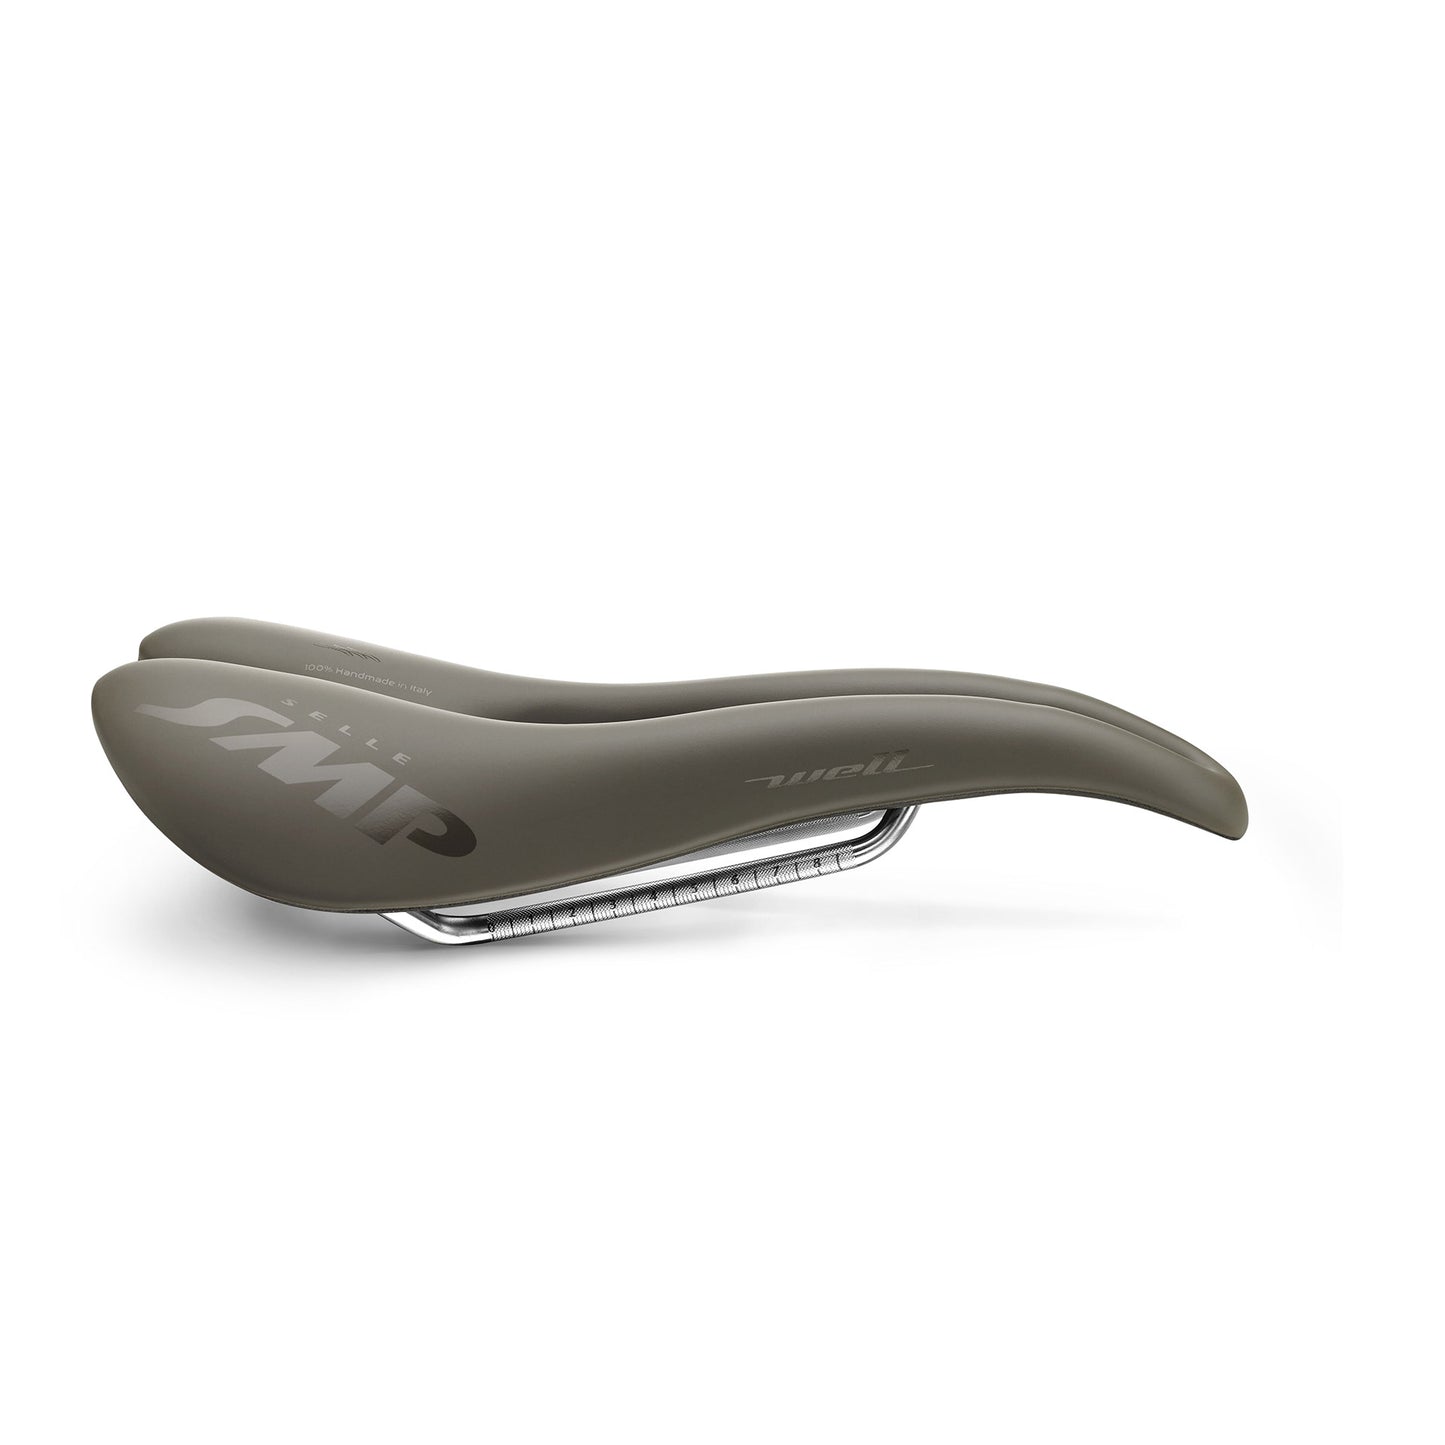 Selle SMP Zadel Tour Well gravel edition